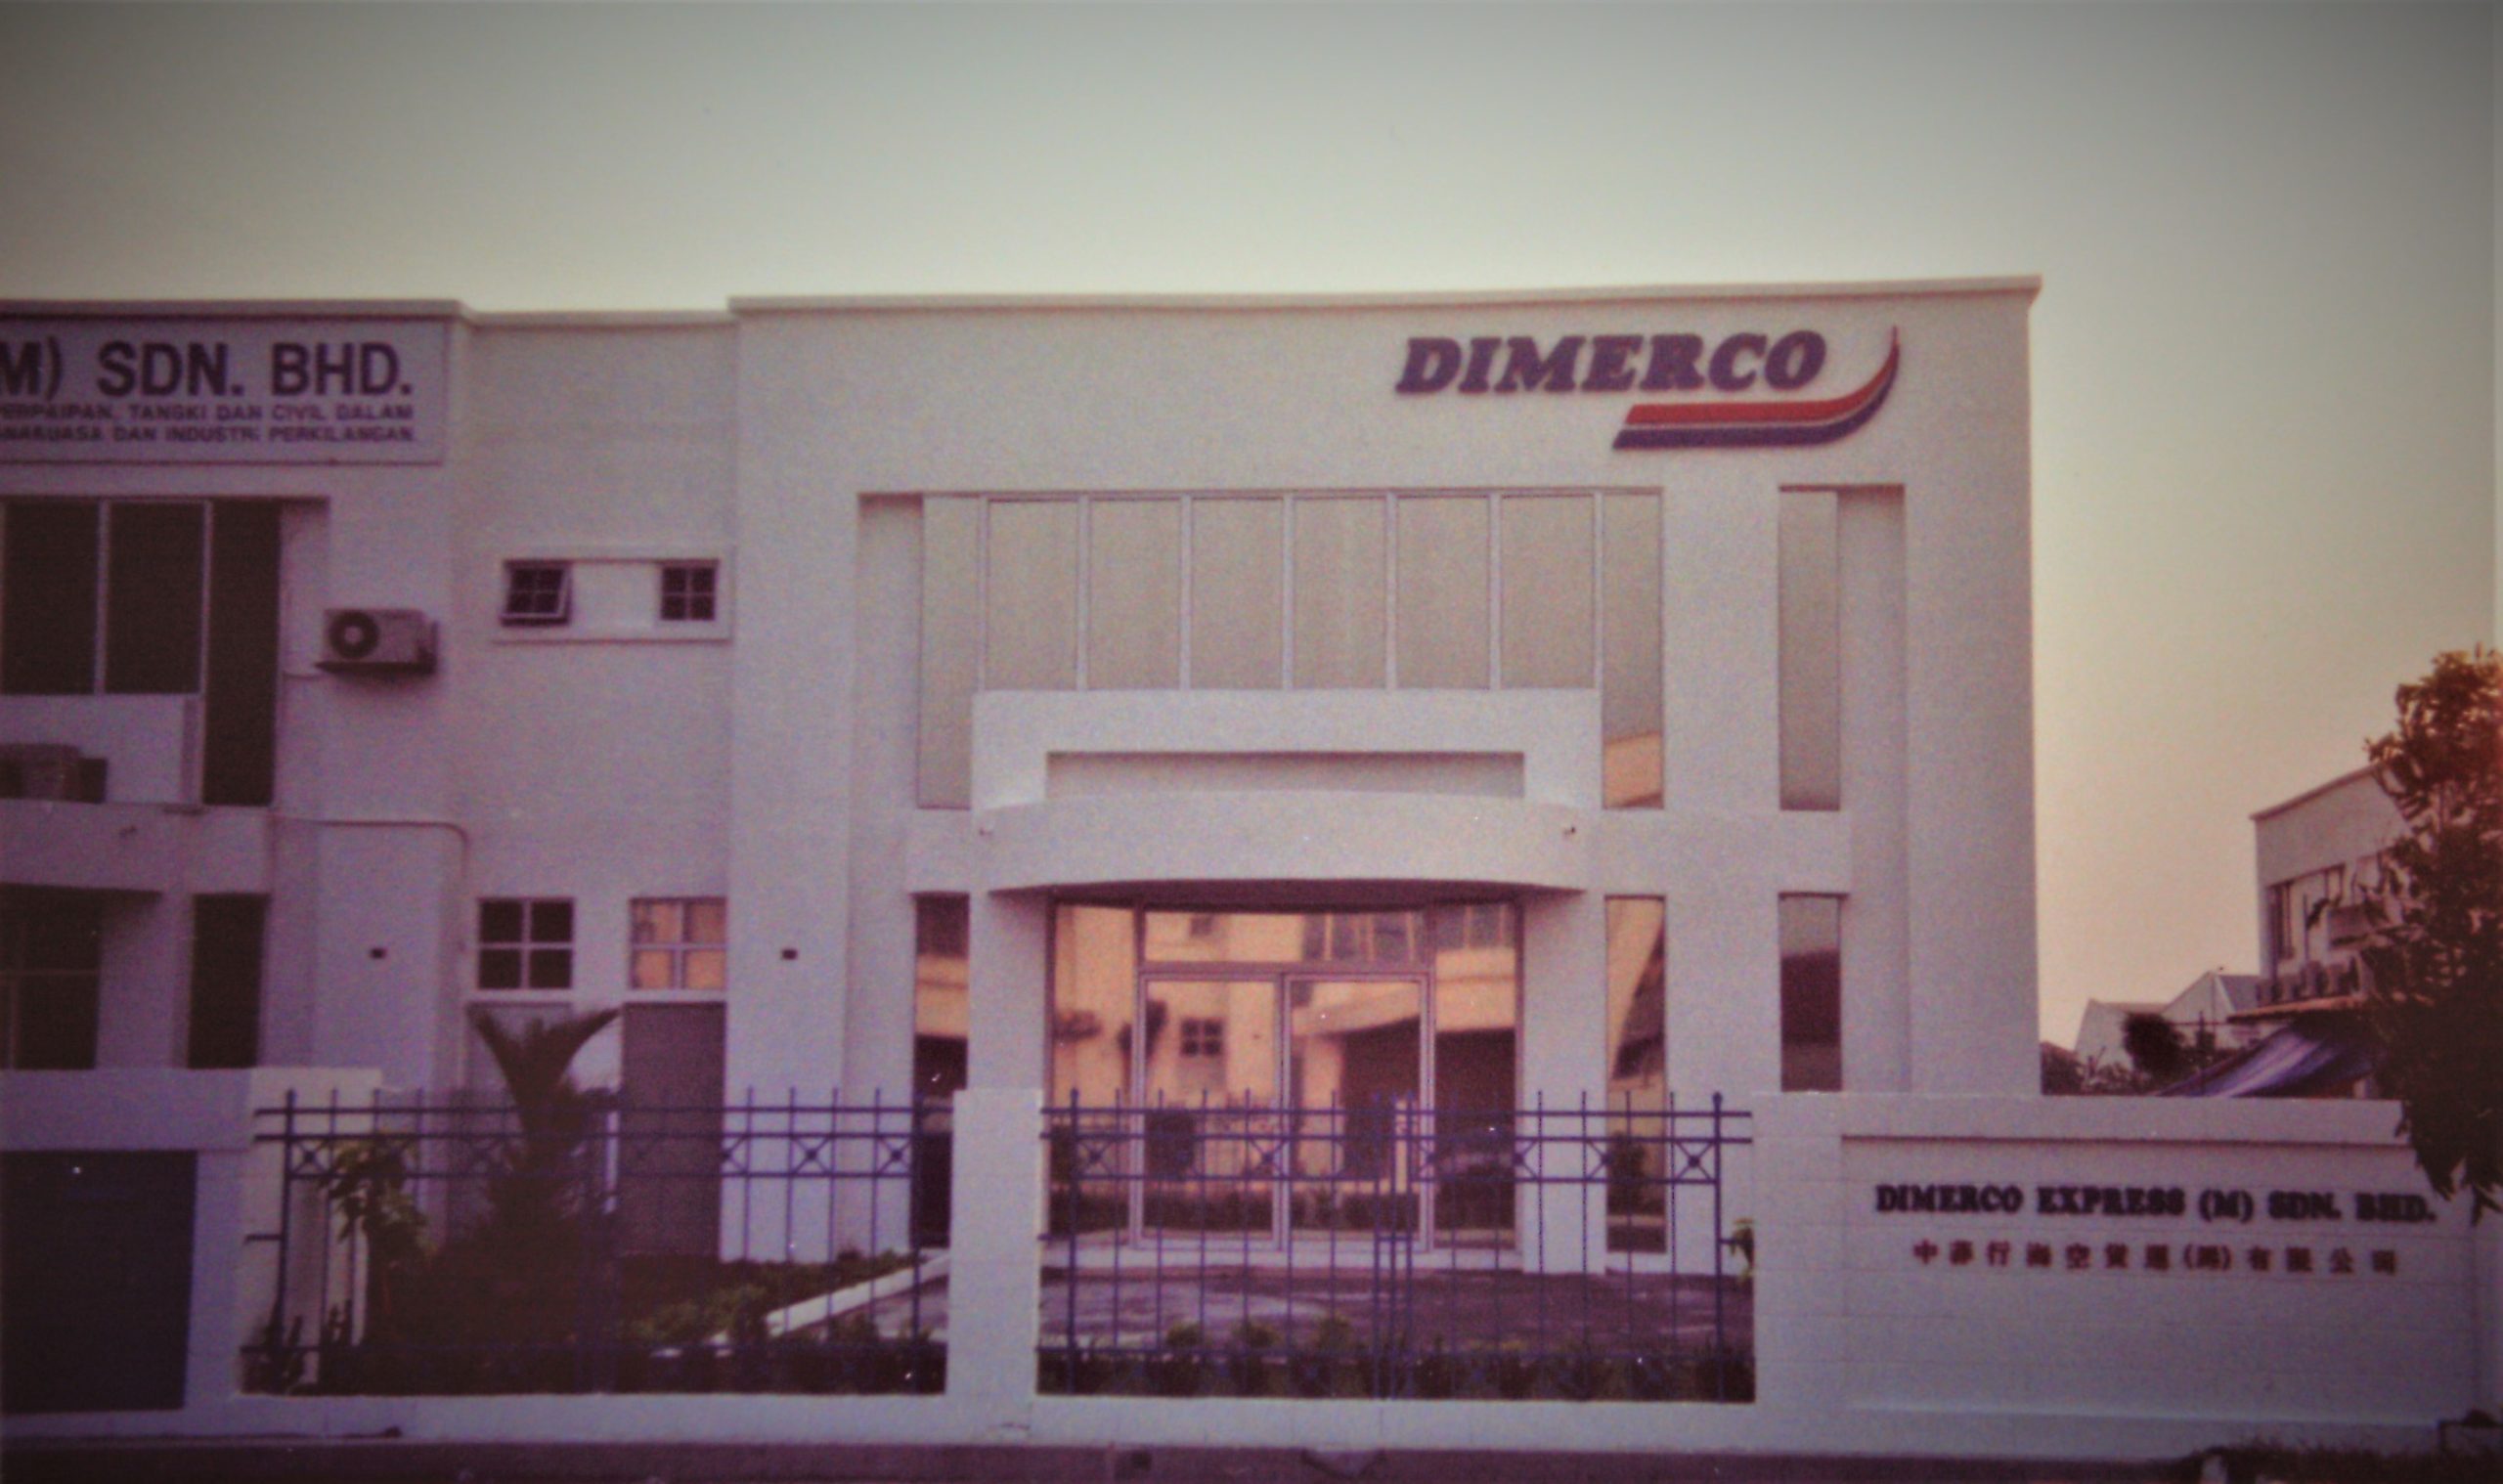 Building with Dimerco logo